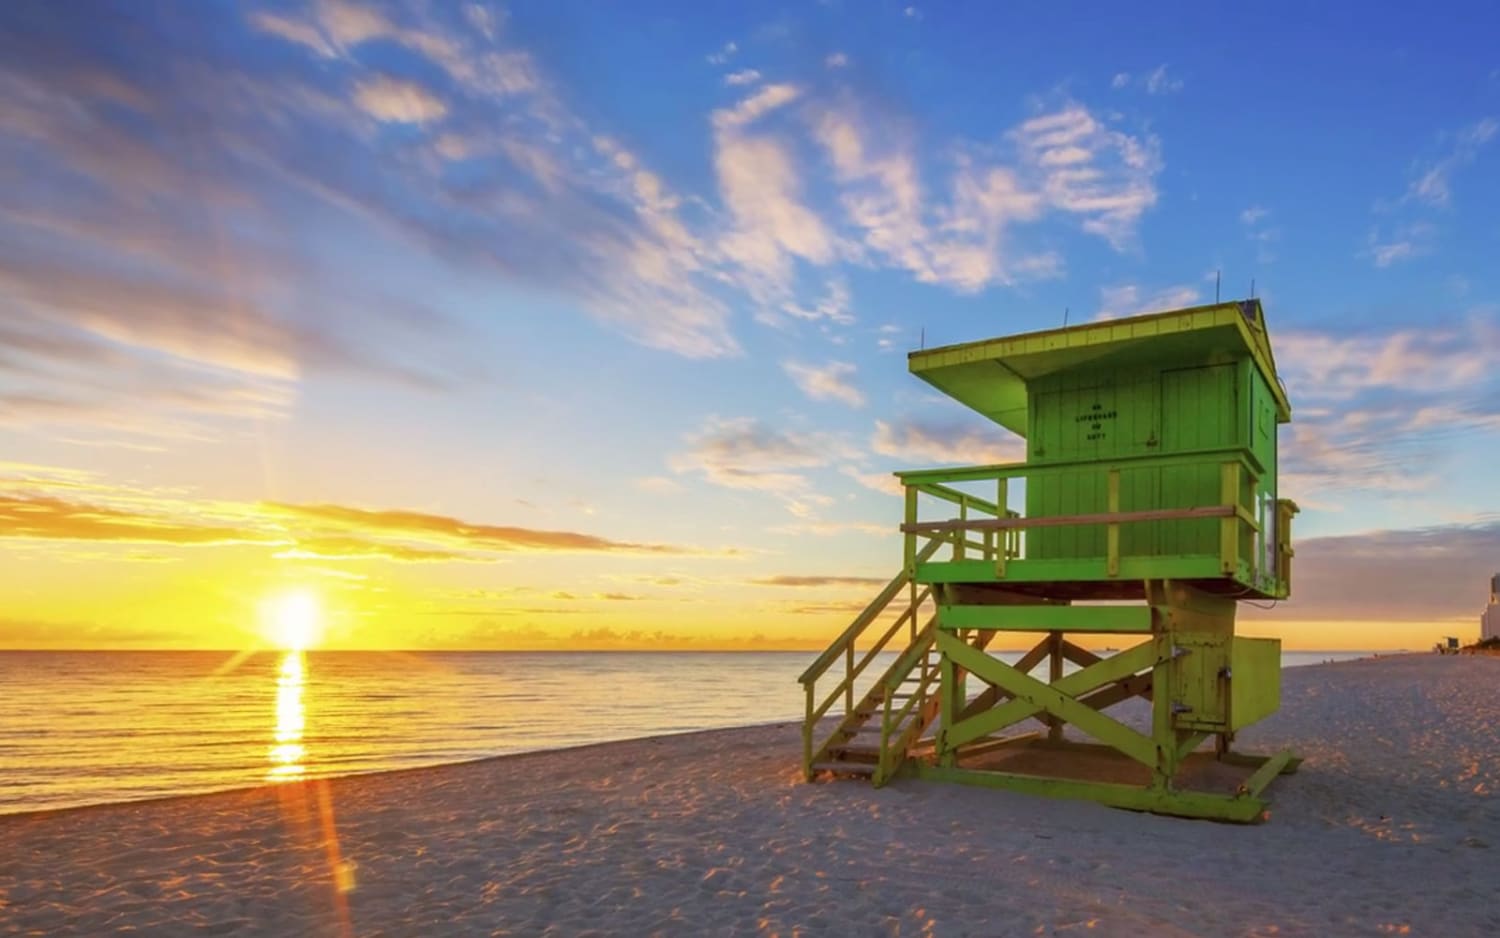 VIDEO: Five Things to Do in Miami